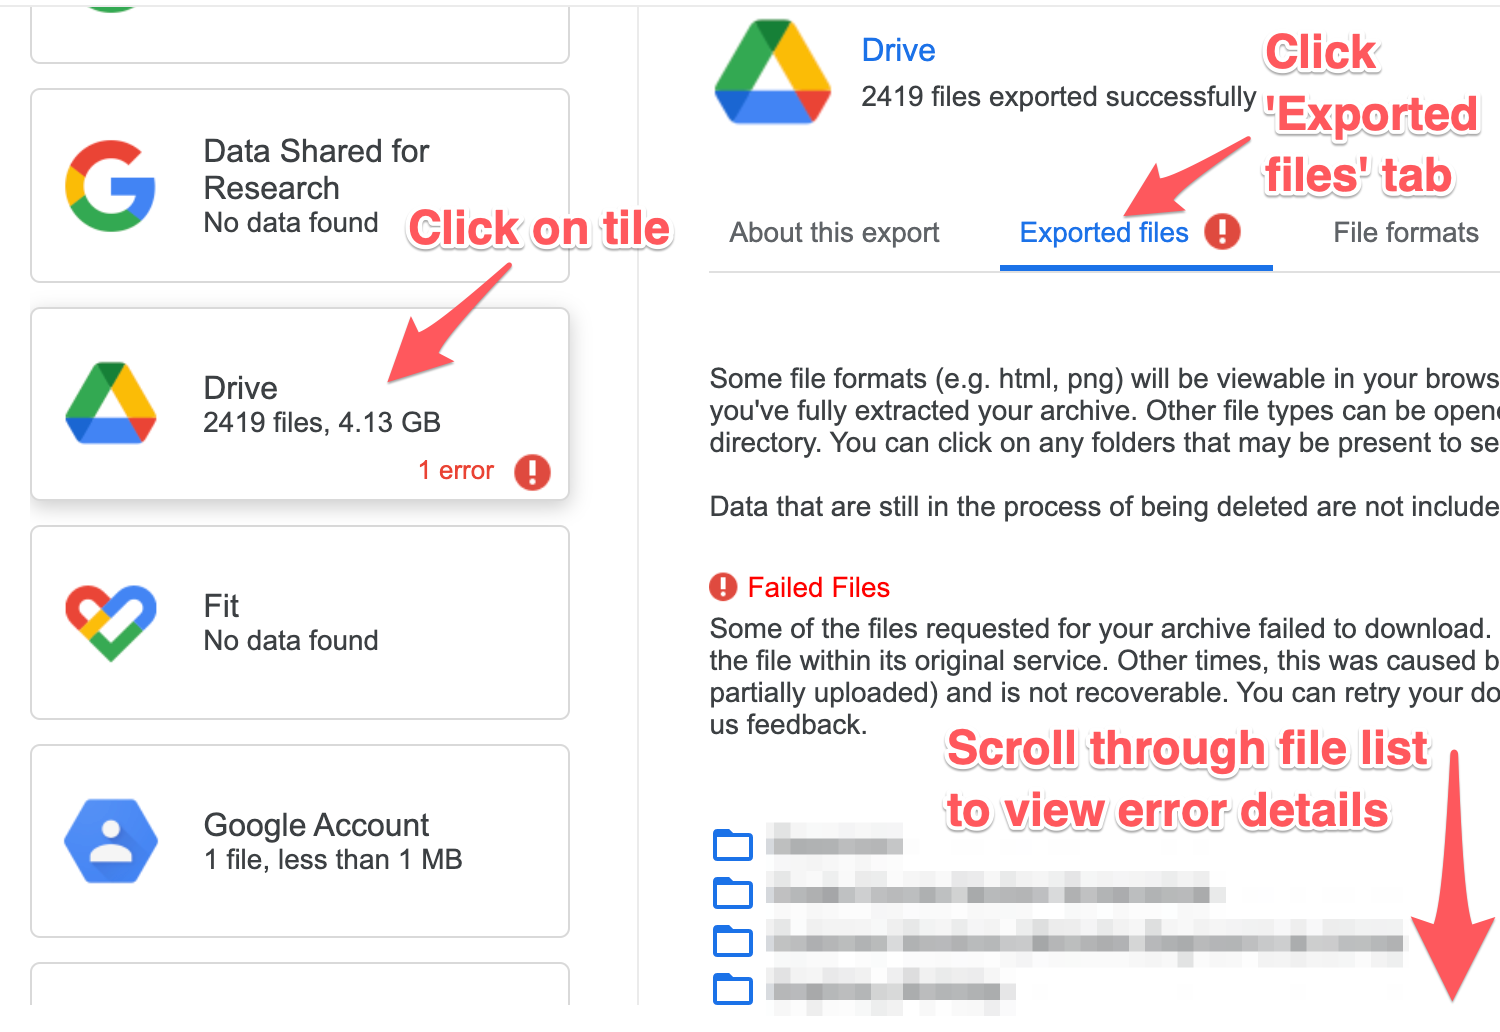 View exported file download errors by Google tool or service